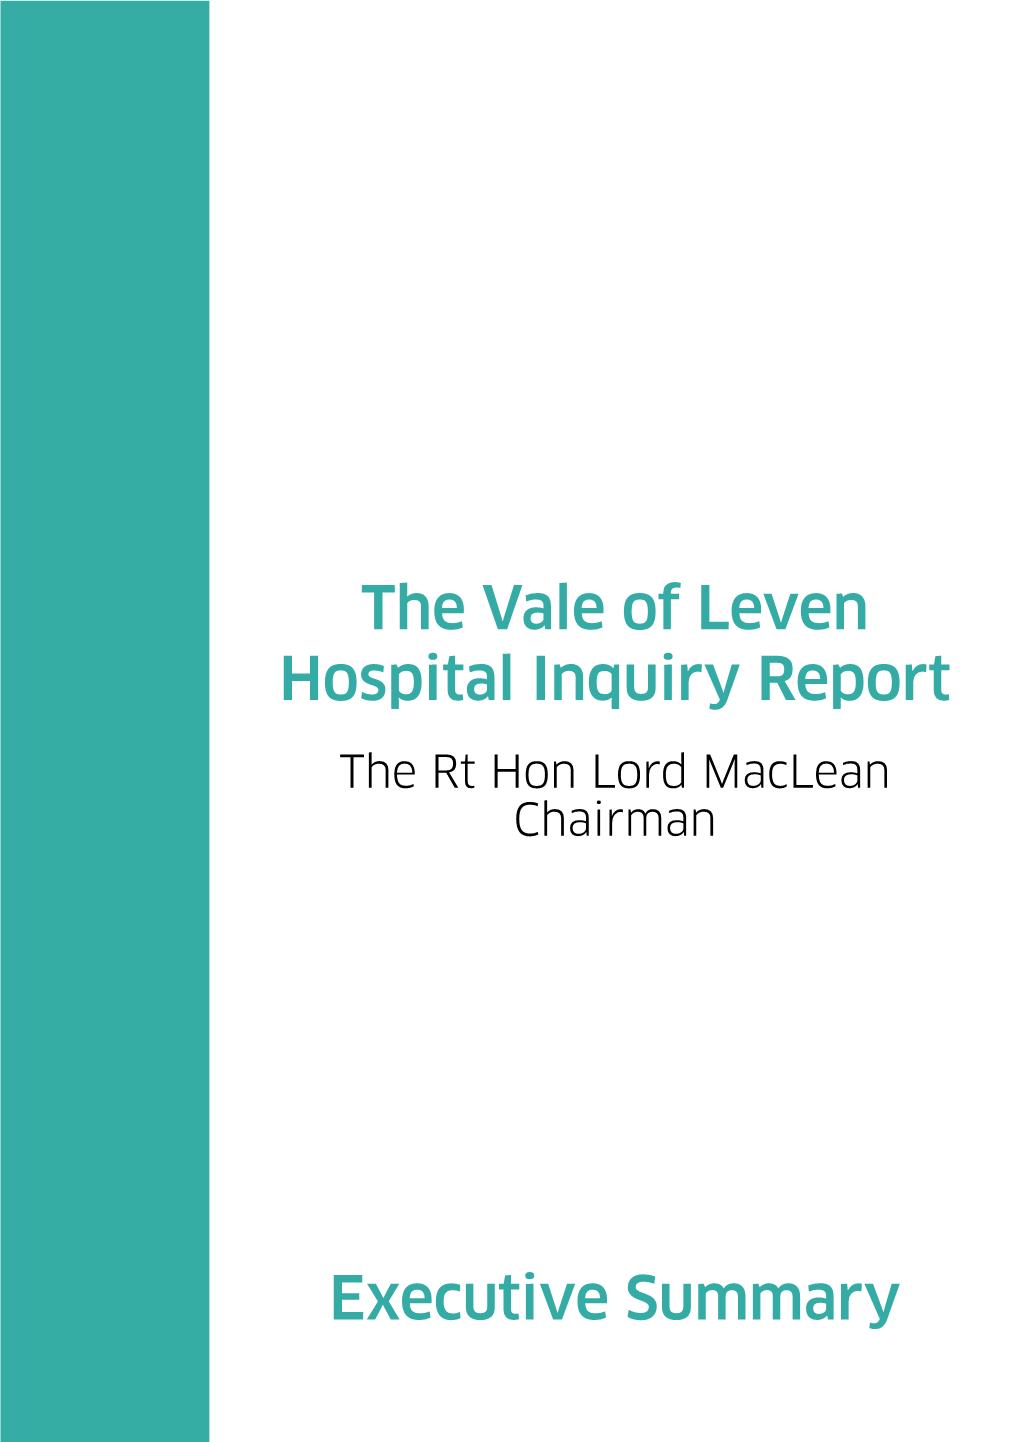 The Vale of Leven Hospital Inquiry Report Executive Summary